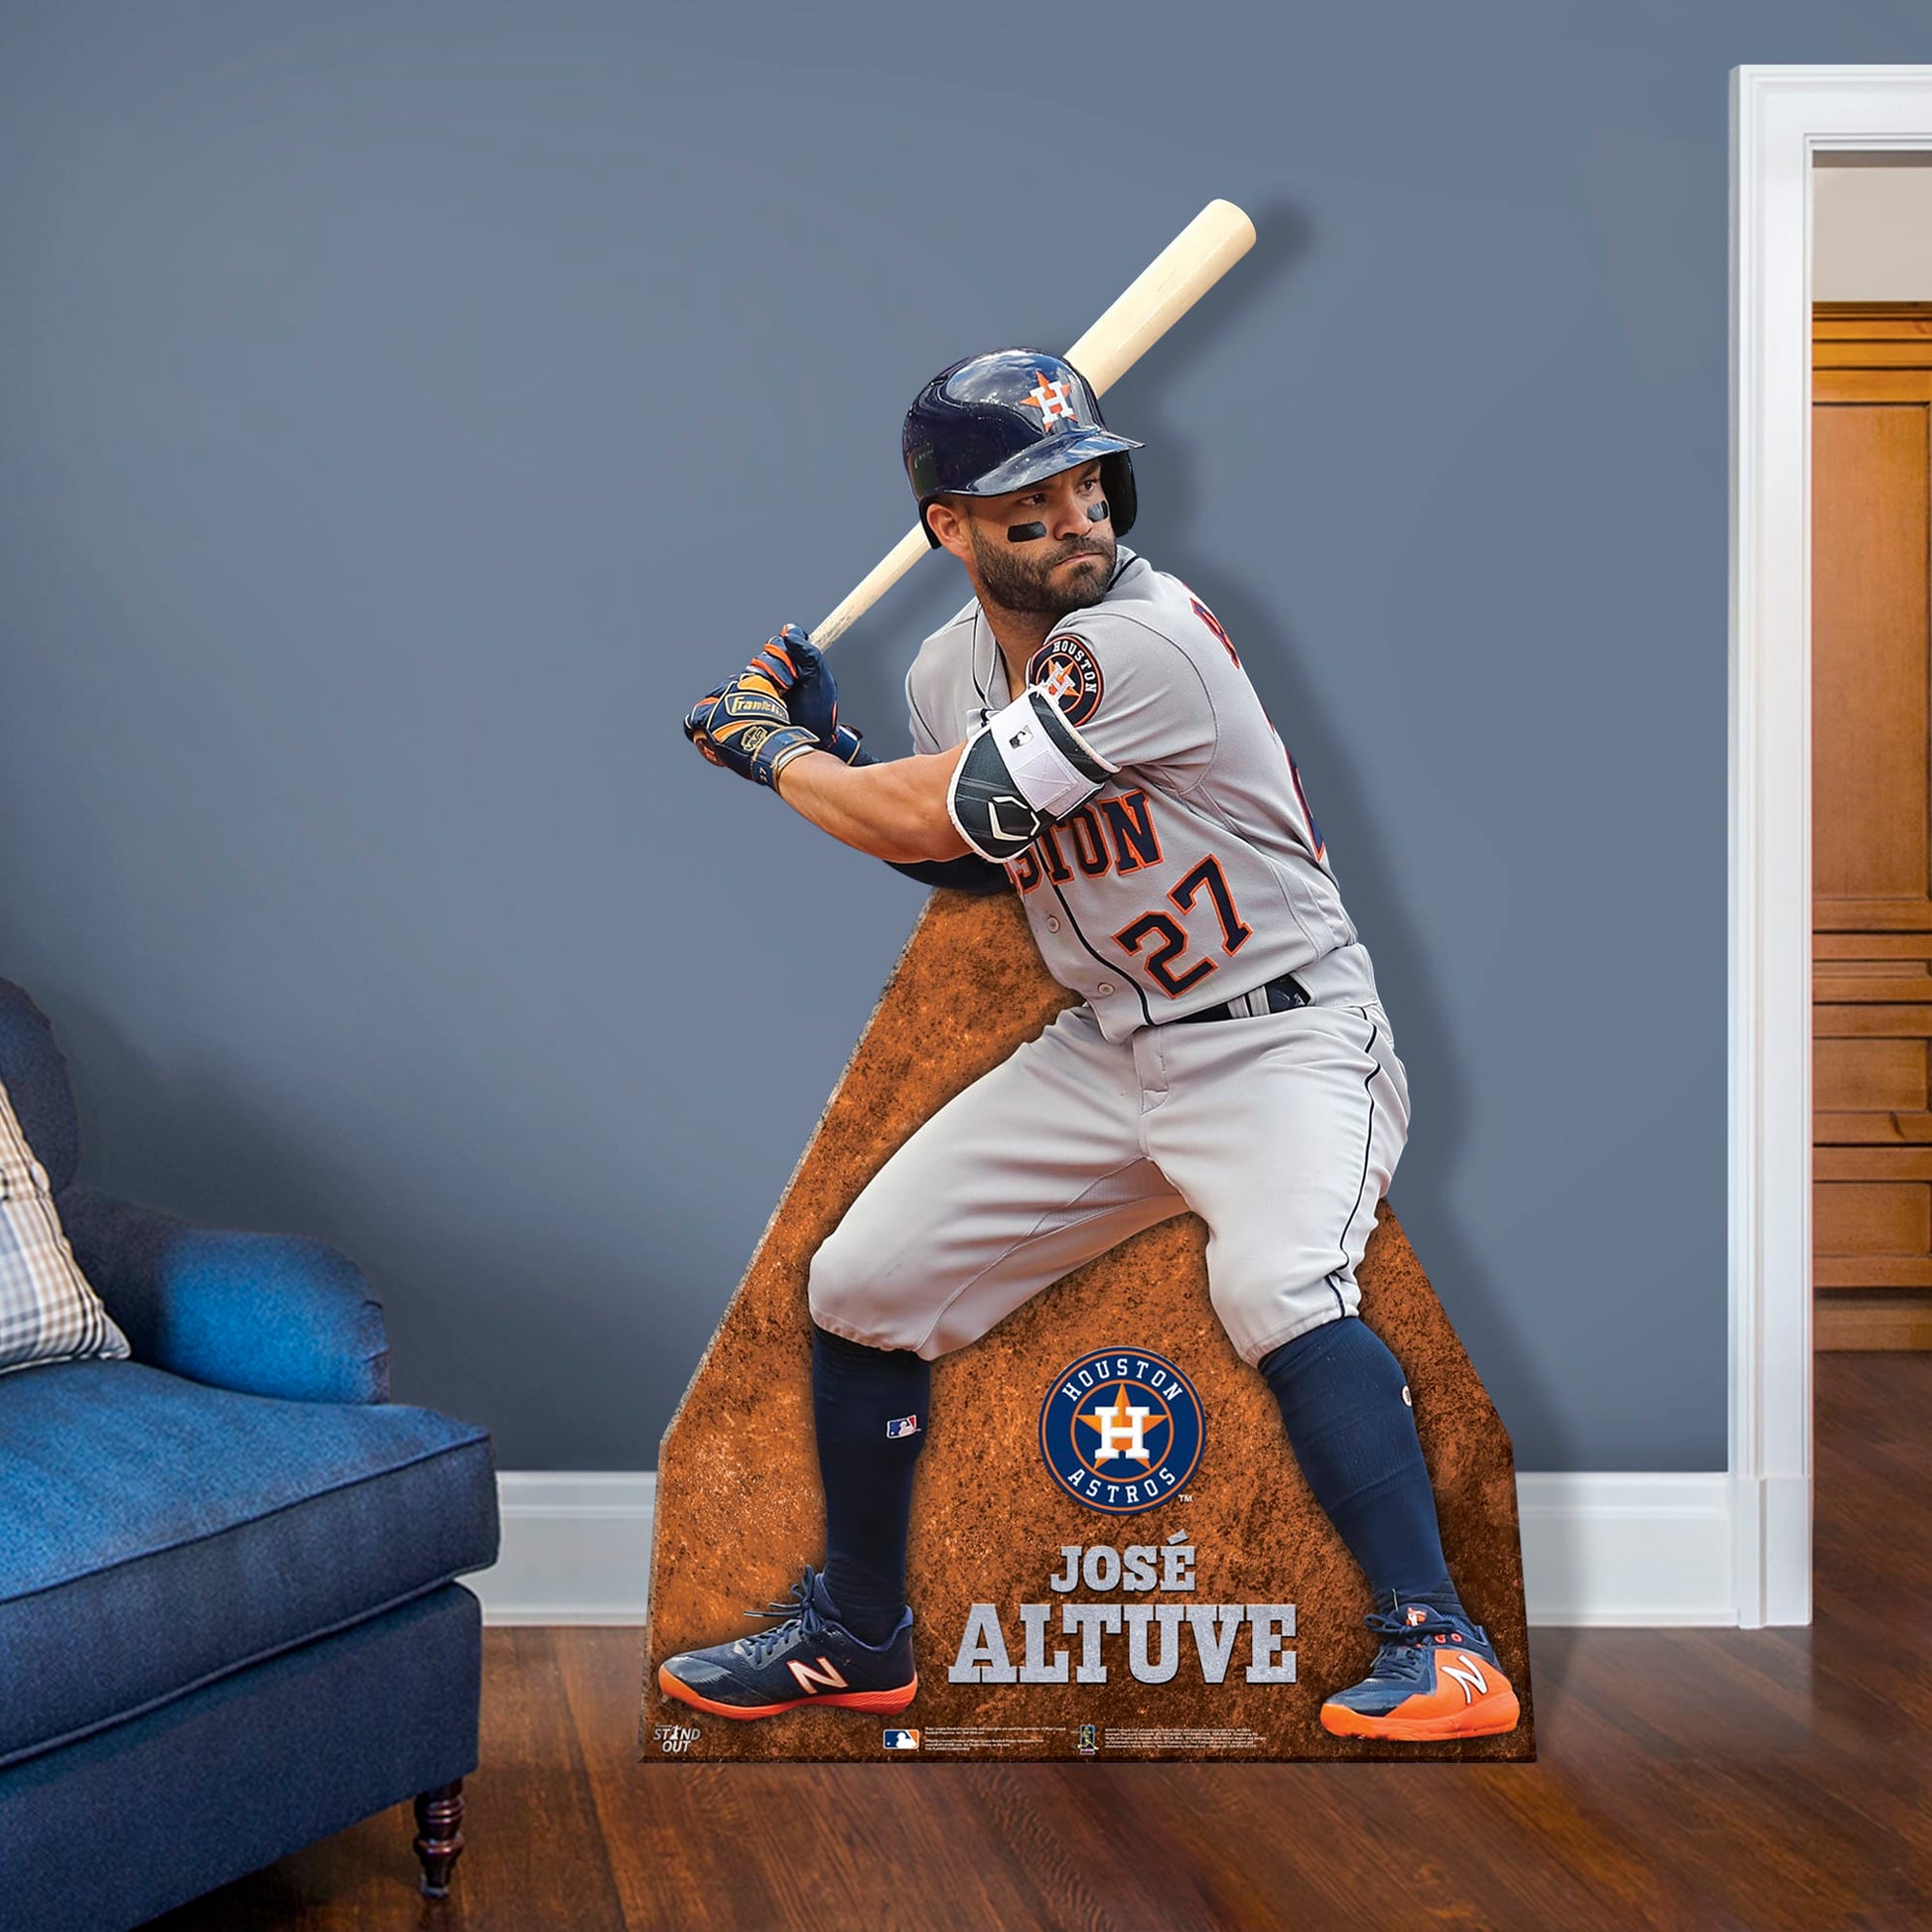 Houston Astros Big Boys and Girls Official Player Jersey Jose Altuve